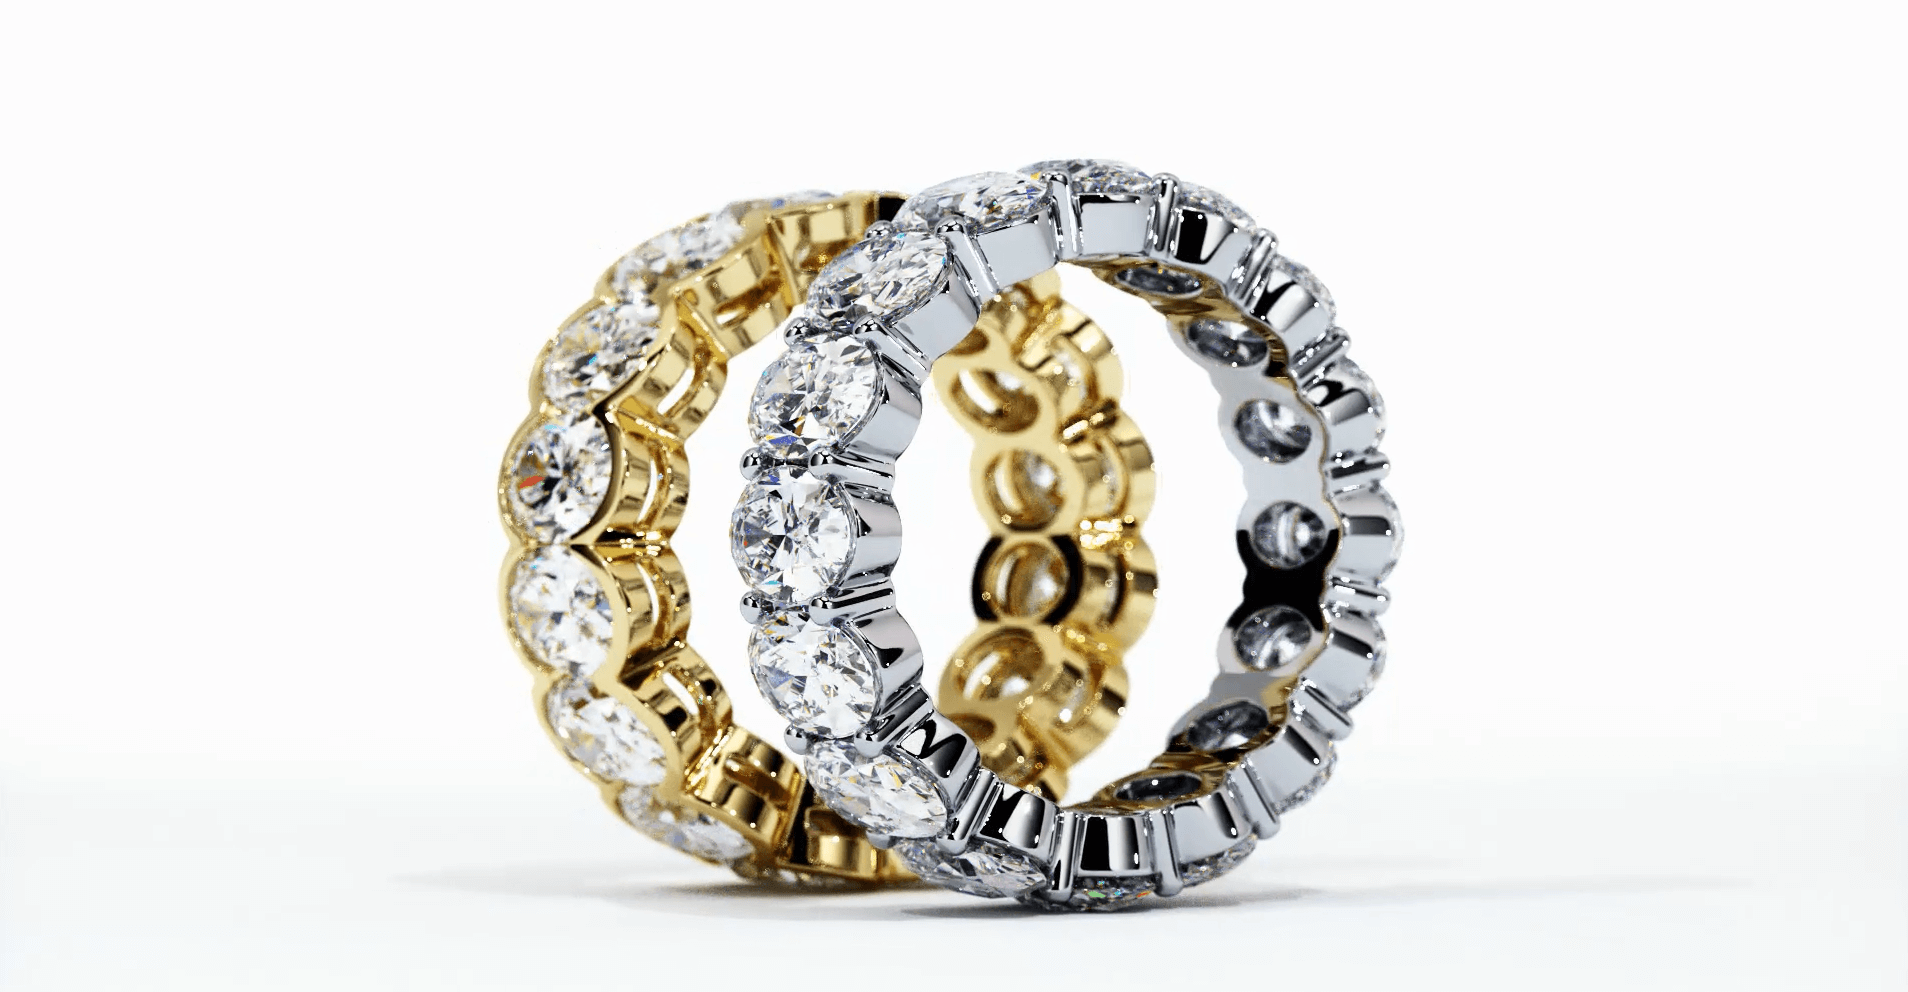 A side profile of custom diamond wedding rings, one made from 24K gold and 14K white gold, each set with multiple diamonds, showcasing the luxurious and custom design elements of high-end jewelry.